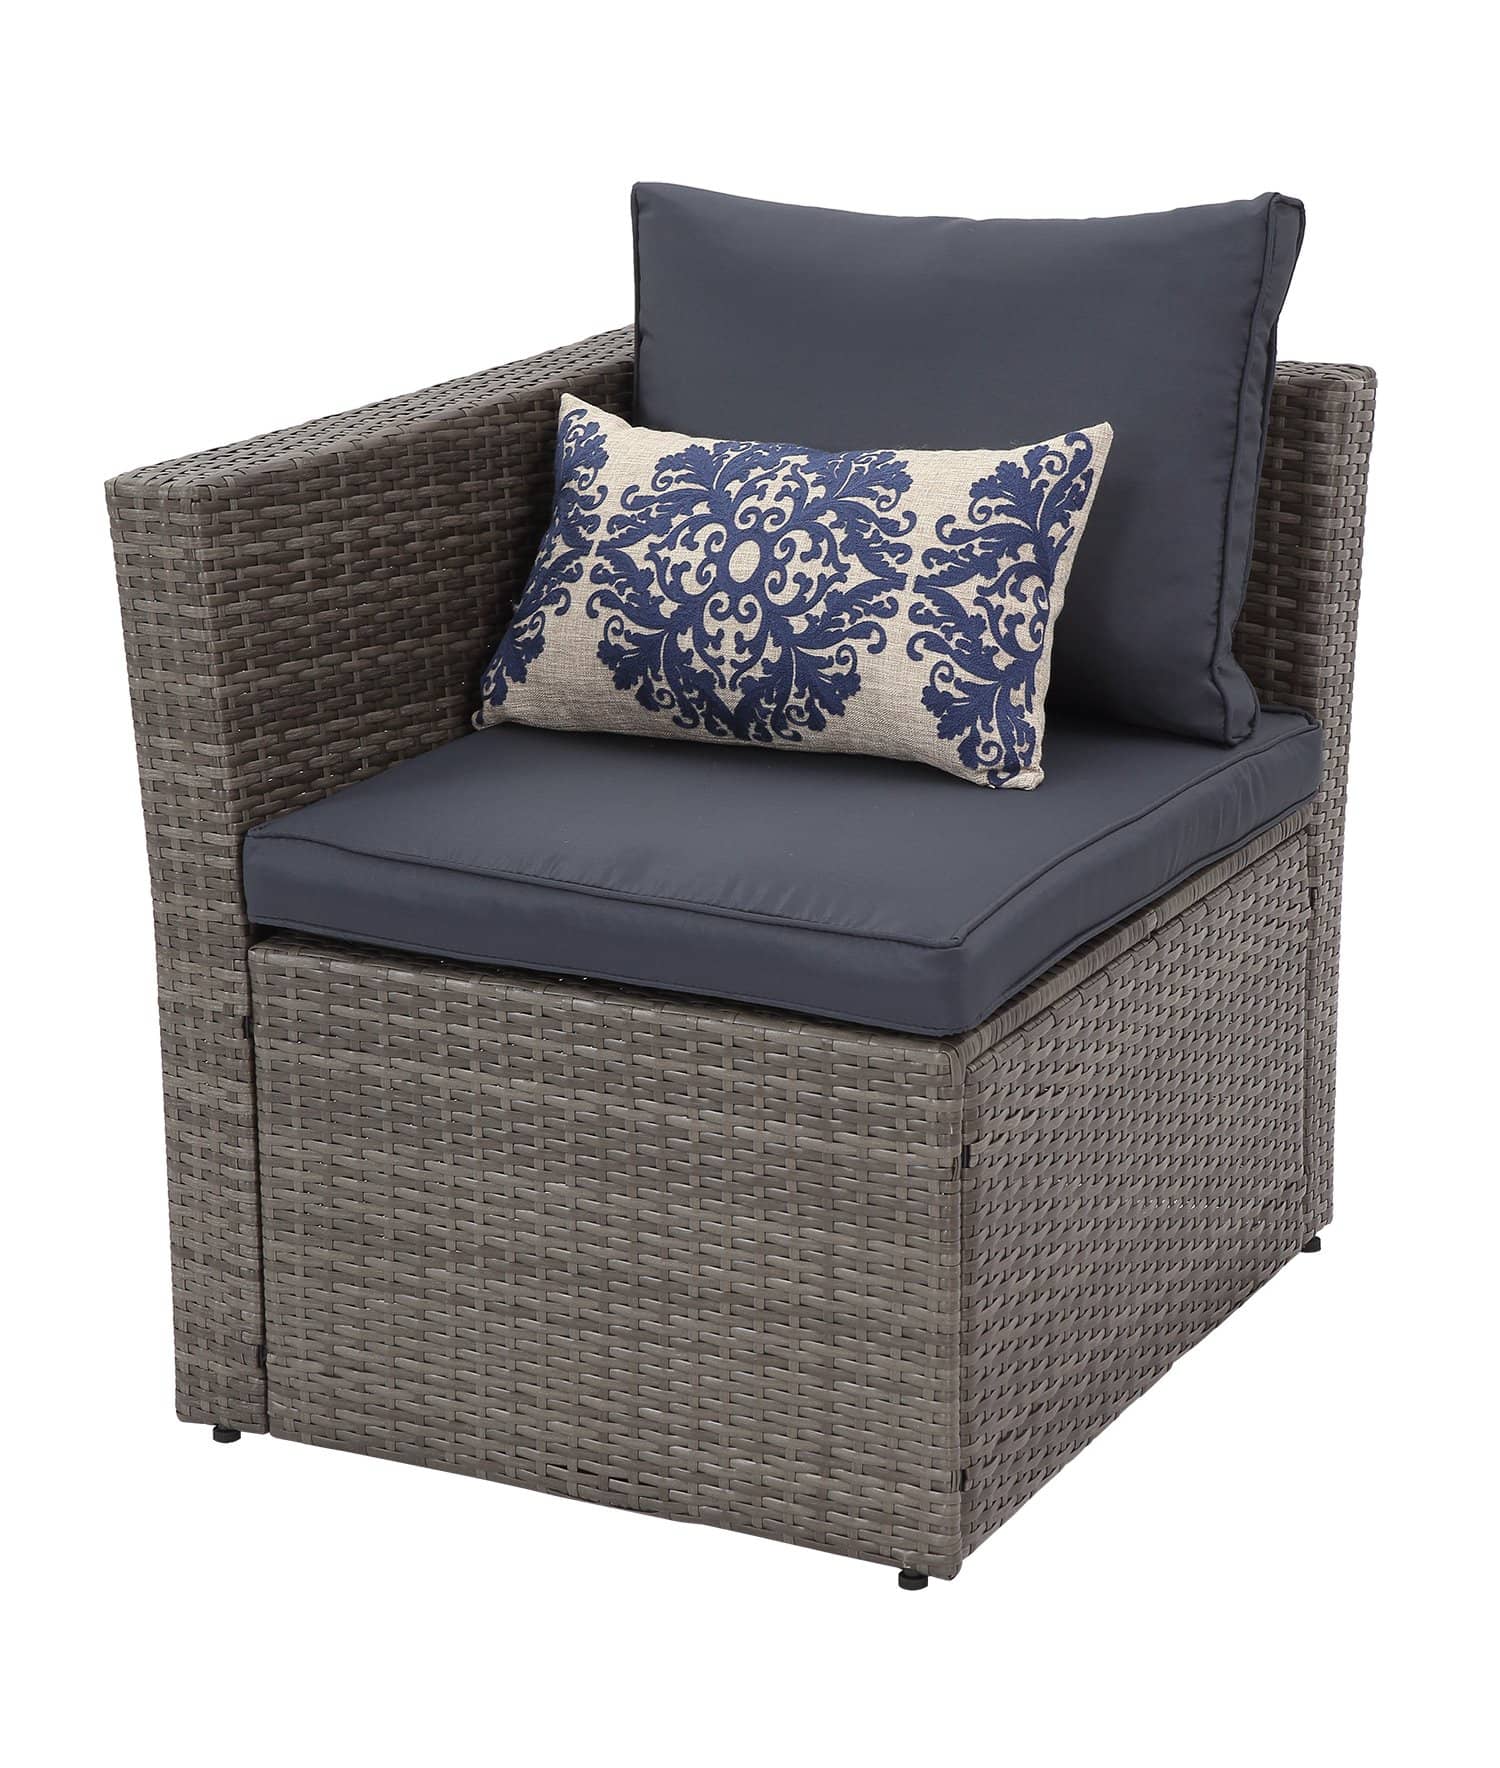 Brisk 6 Piece All Weather Wicker Sofa Seating Group with Cushions, Ottoman with Storage and Coffee Table - Navy